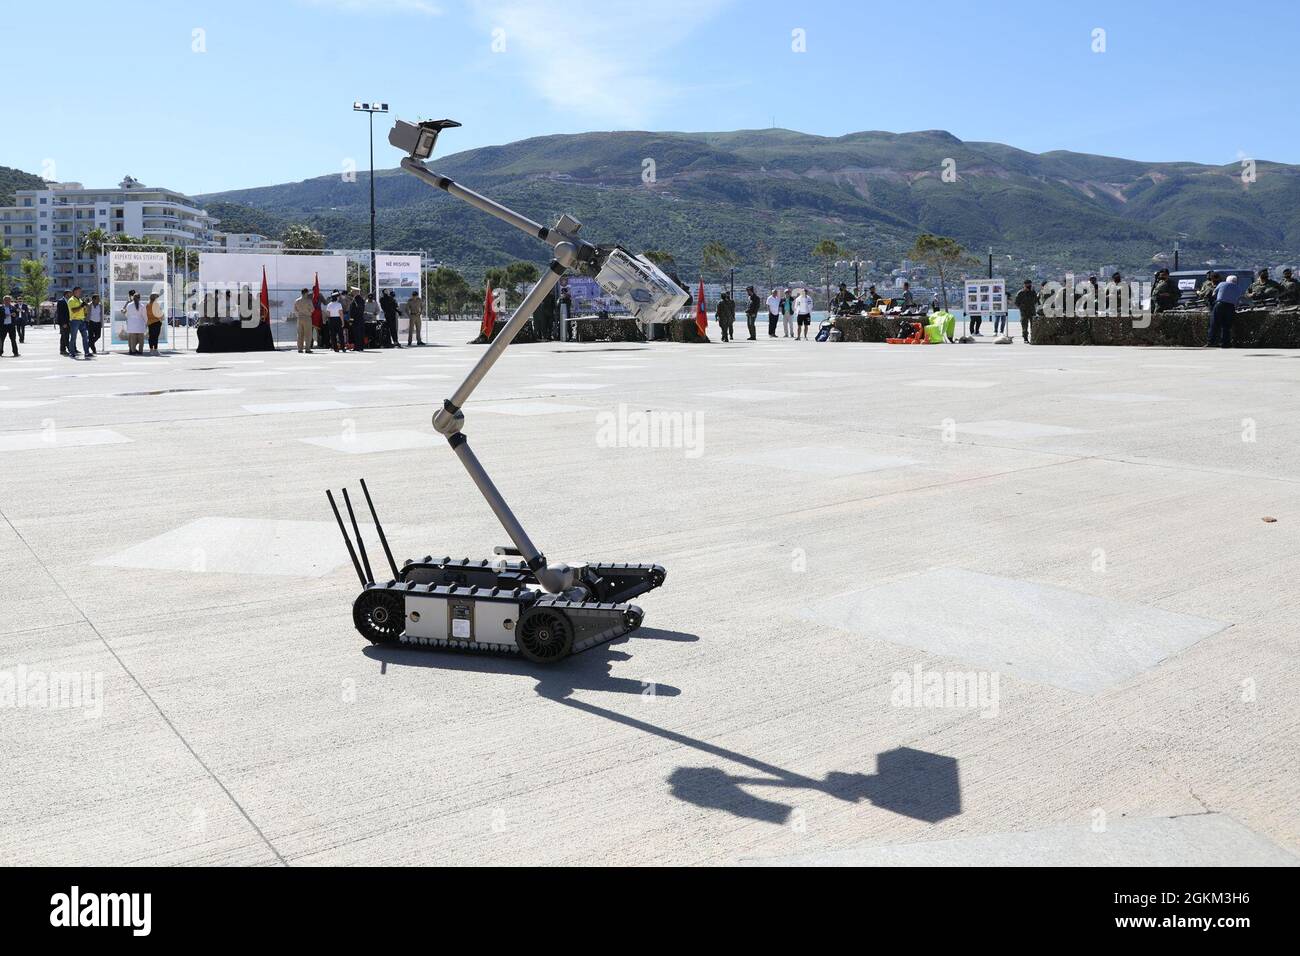 The Albanian Armed Forces Explosive Ordnance Disposal (EOD) unit shows off U.S.-donated equipment, including a robot designed to move explosive devices and keep military personnel safely out of harms way May 22, 2021, at a military sponsored open house in Vlore, Albania, held as part of DEFENDER-Europe 21 activities.  During the event, U.S. Ambassador to Albania Yuri Kim was briefed on the equipment and the continued U.S. commitment to peace and security in Albania, which includes decontamination of landmine and unexploded ordnance sites left over from previous conflict here. DEFENDER-Europe 2 Stock Photo